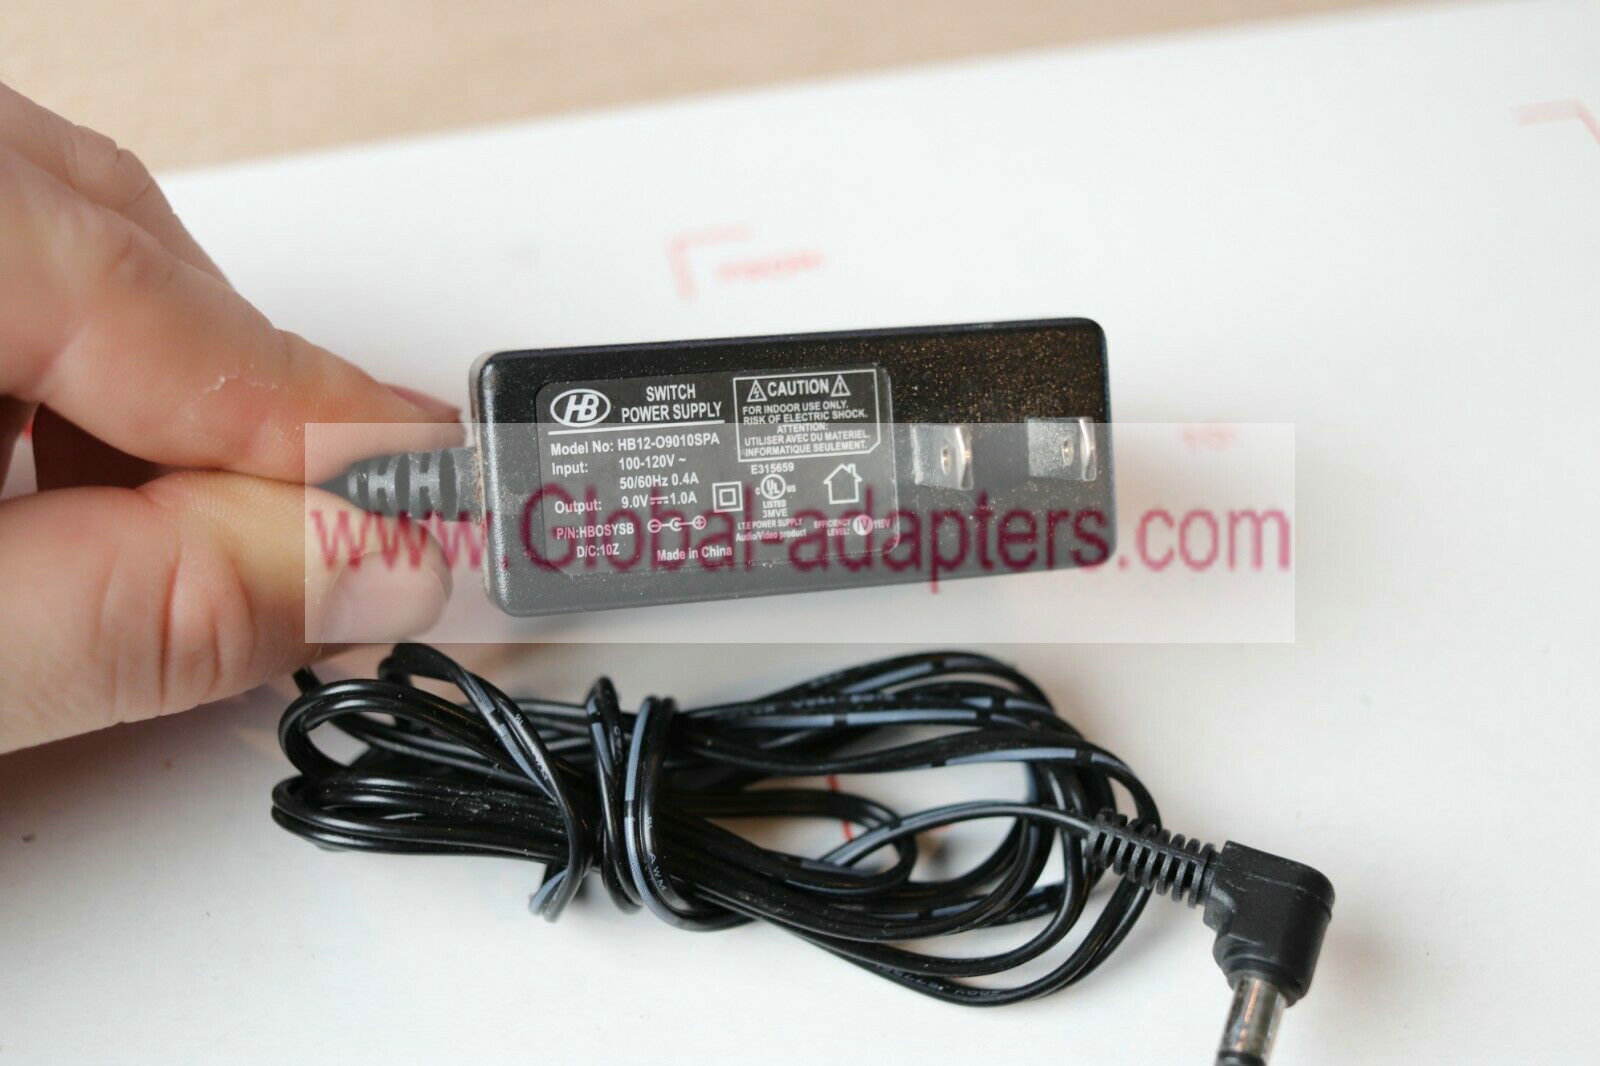 New HB HB12-09010SPA 9V 1A Switch Power Supply Charger